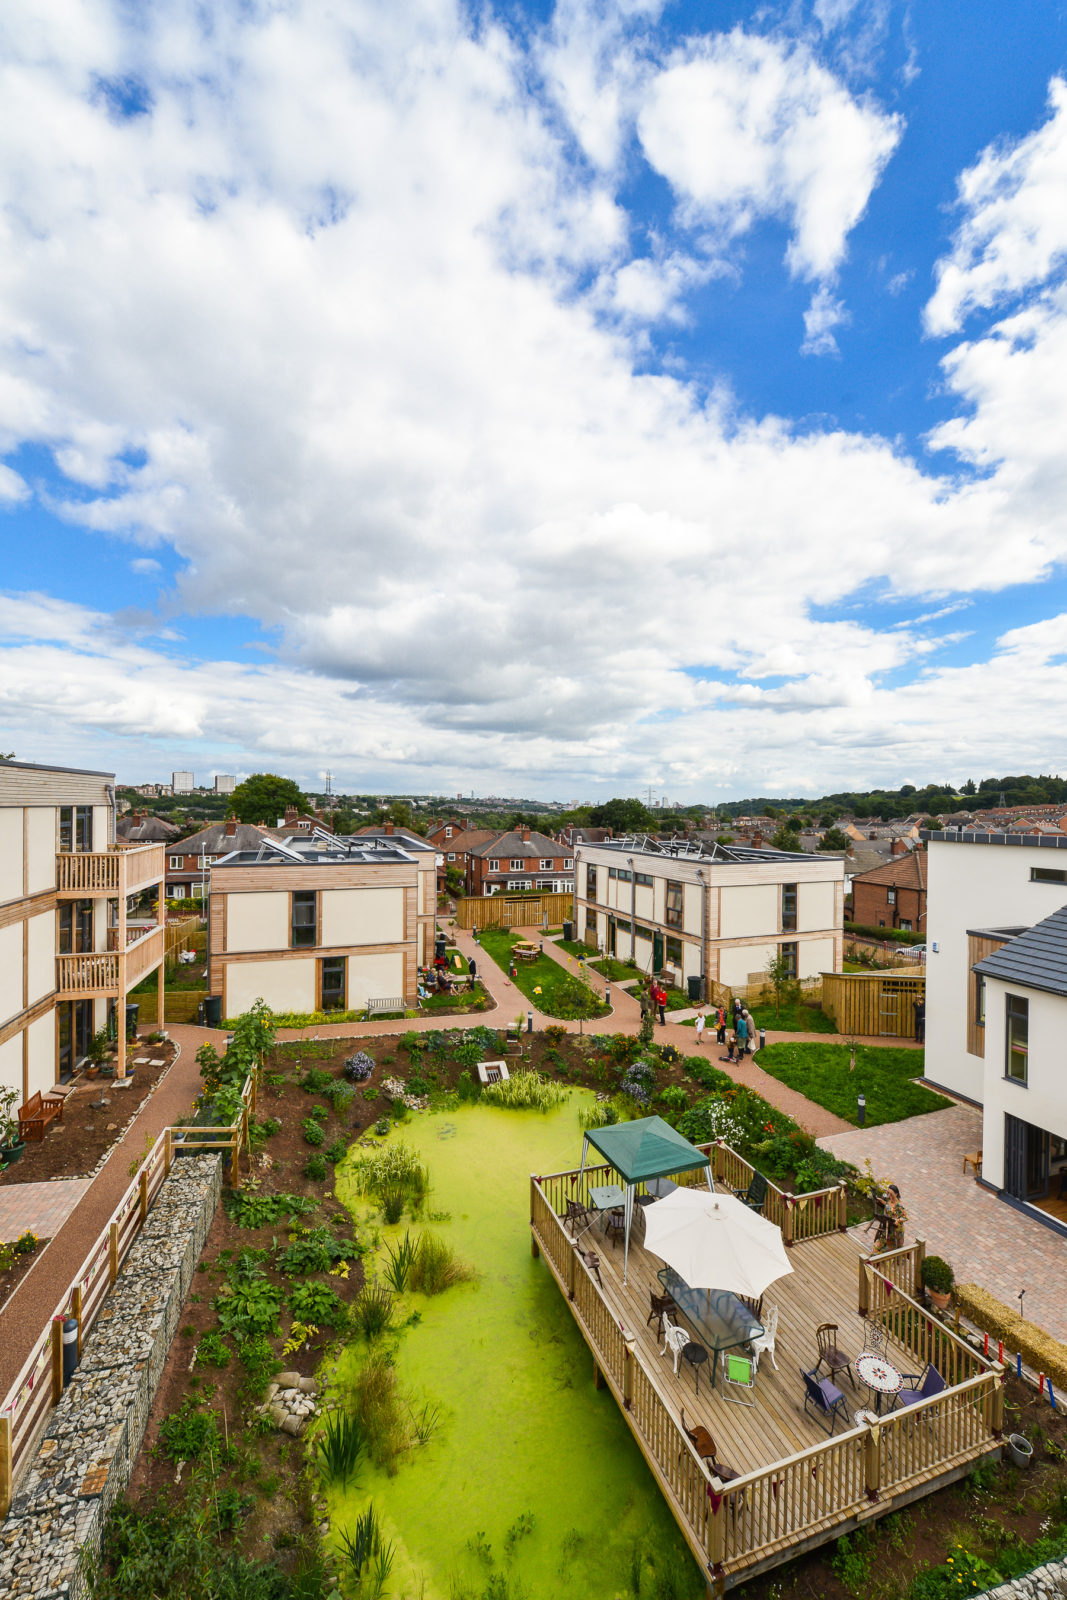 Cohousing in the UK